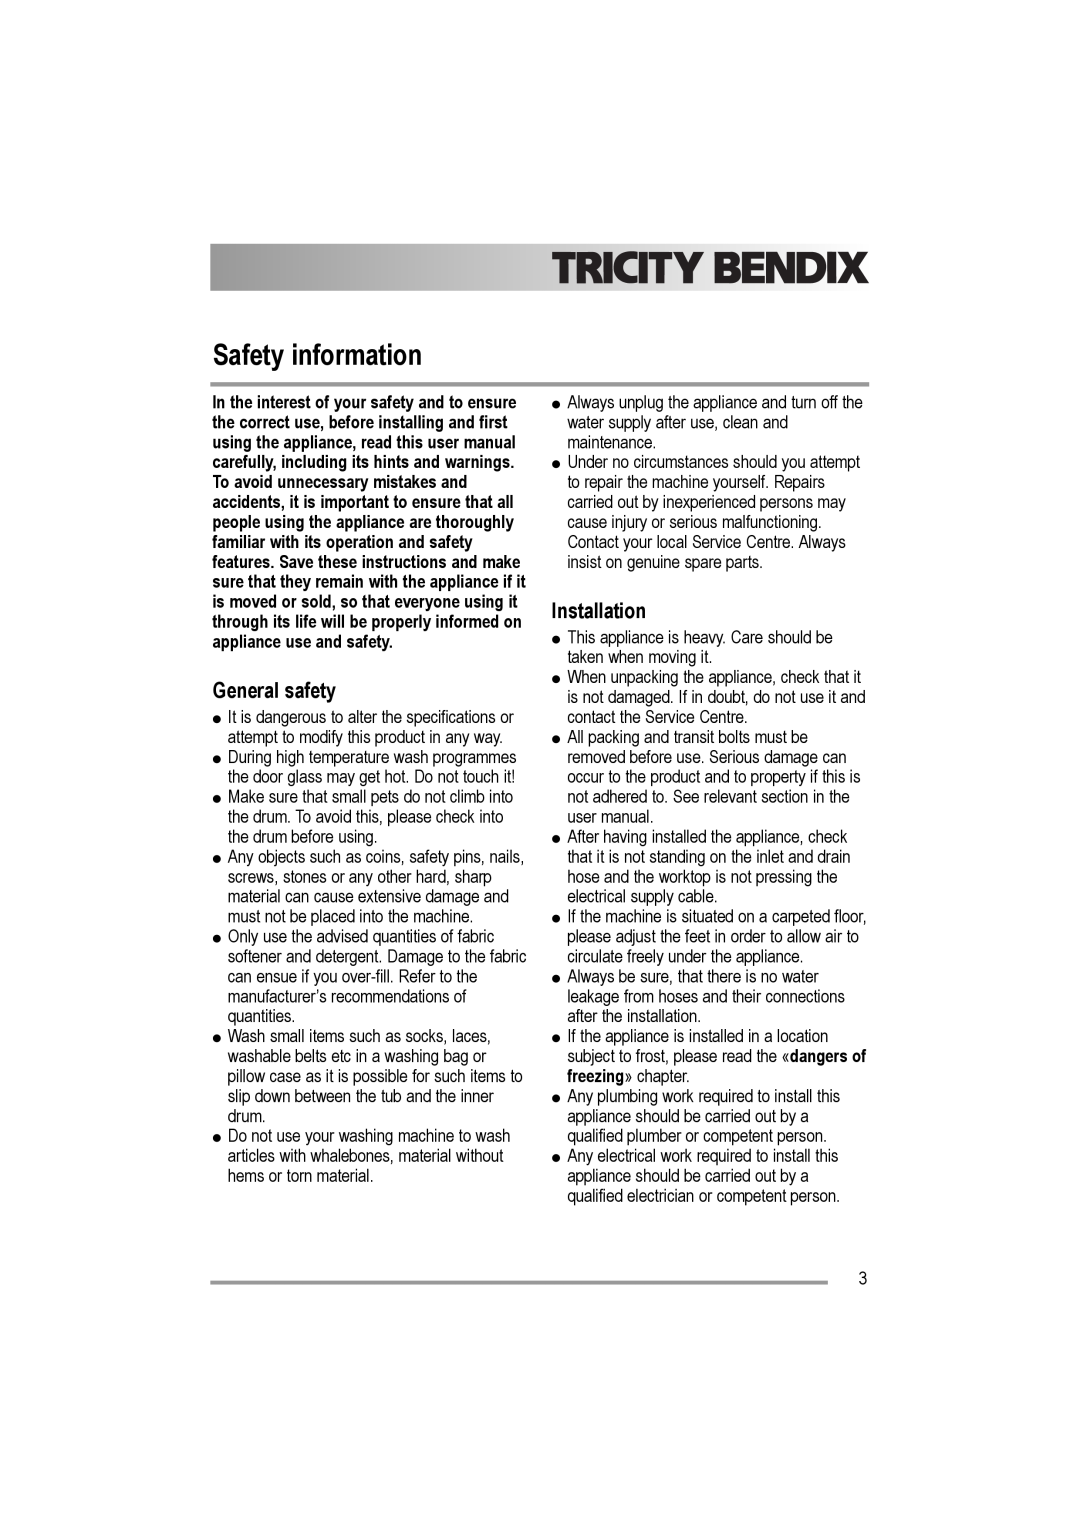 Electrolux AW 1202 W, AW 1402 W user manual Safety information, General safety, Installation 